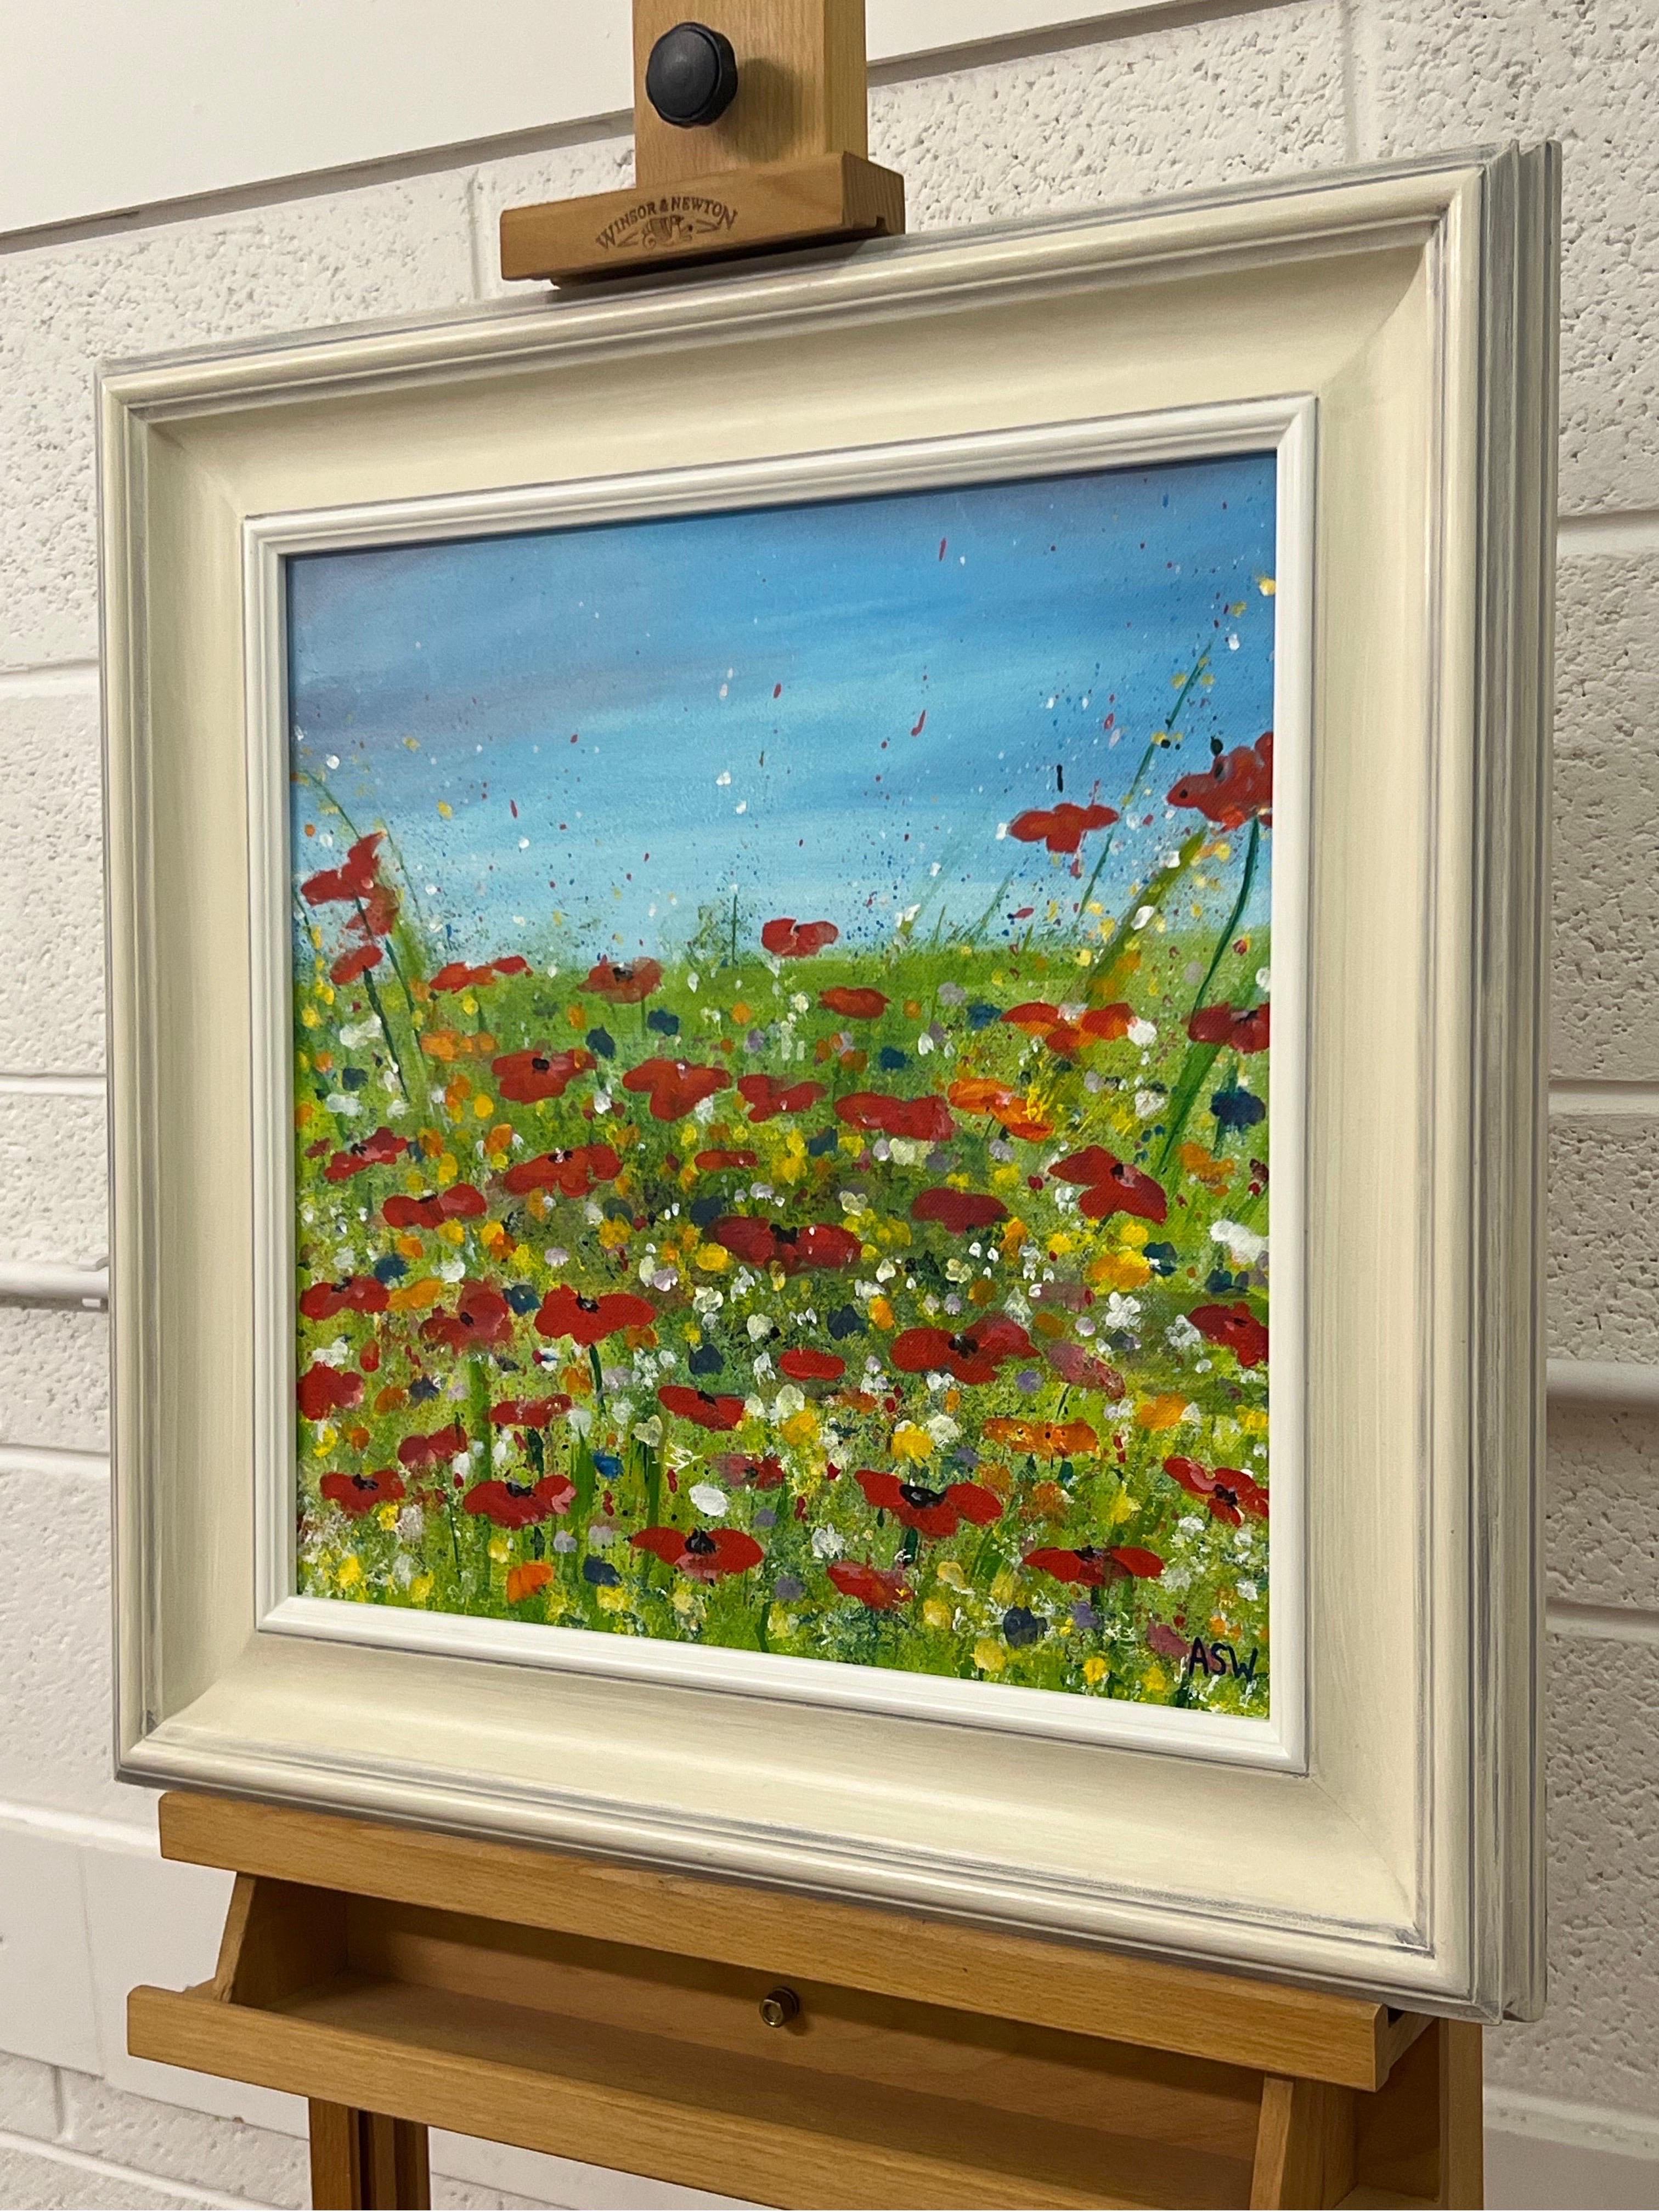 Red Poppy Flowers in a Wild Green Meadow with a Blue Sky in the English Countryside by Contemporary British Artist, Angela Wakefield. Framed in the highest quality hand-finished contemporary off-white moulding. 

Art measures 16 x 16 inches
Frame